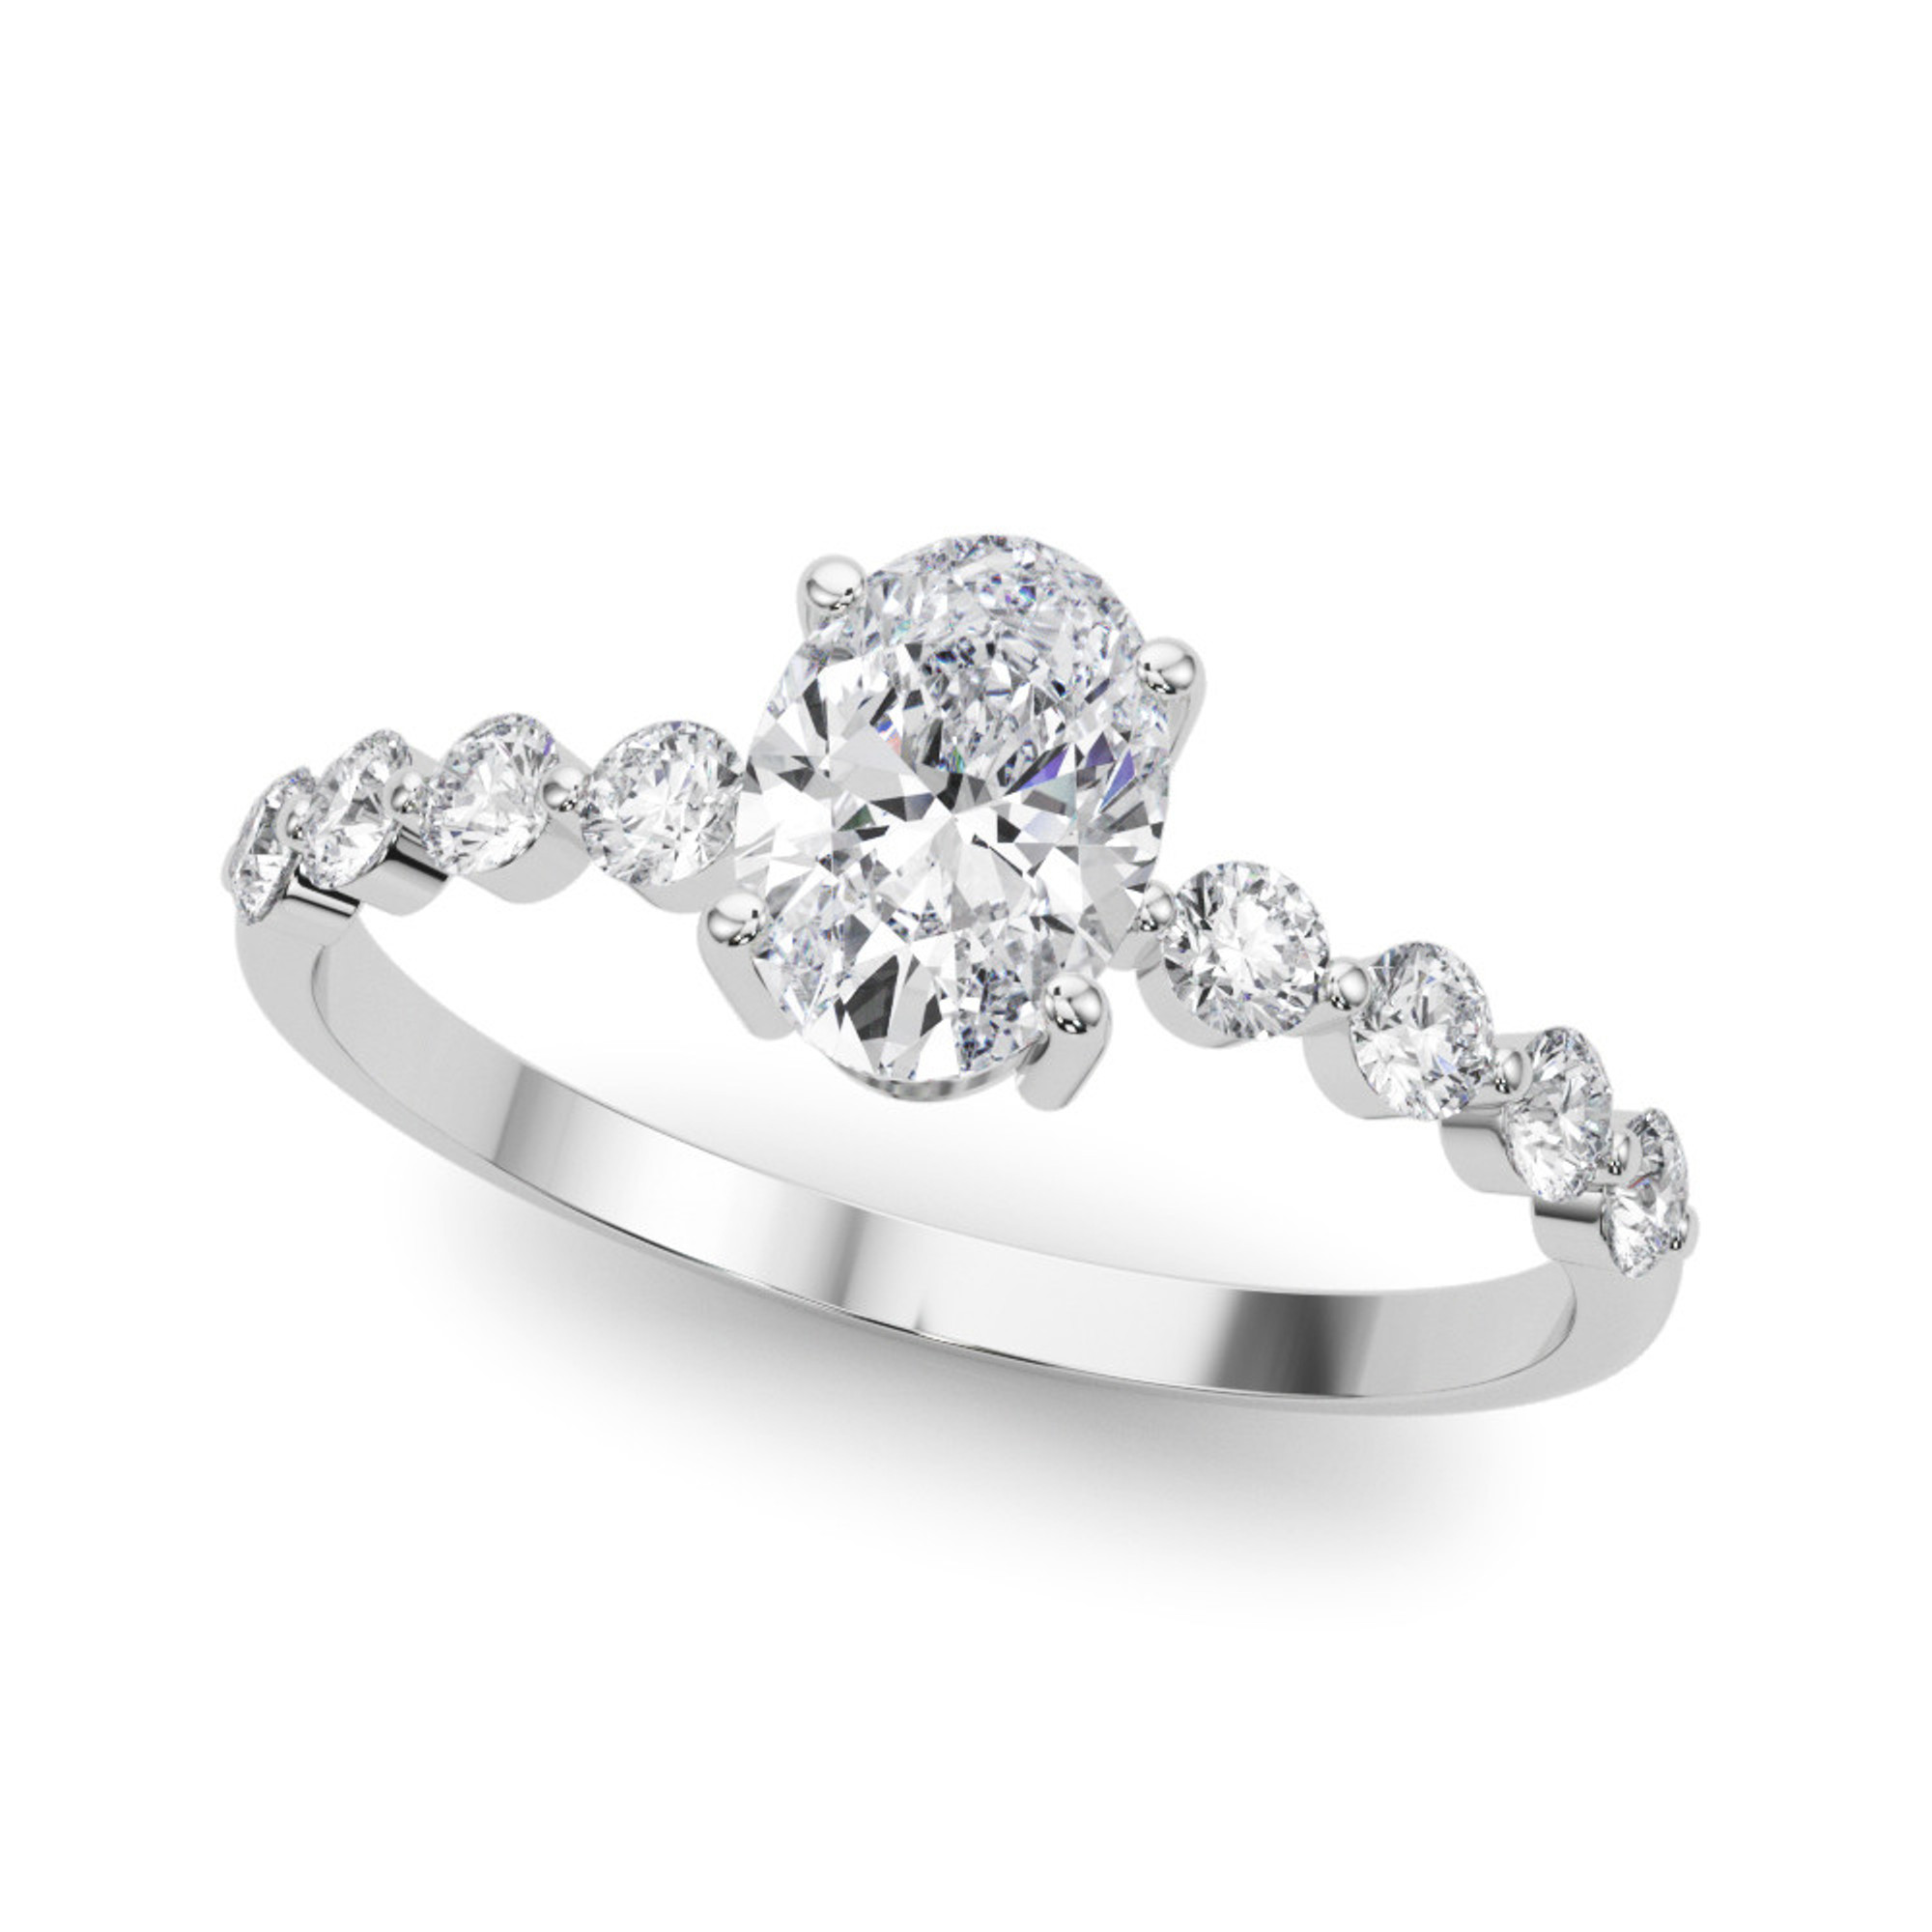 Oval Shared Prong Diamond Engagement Ring